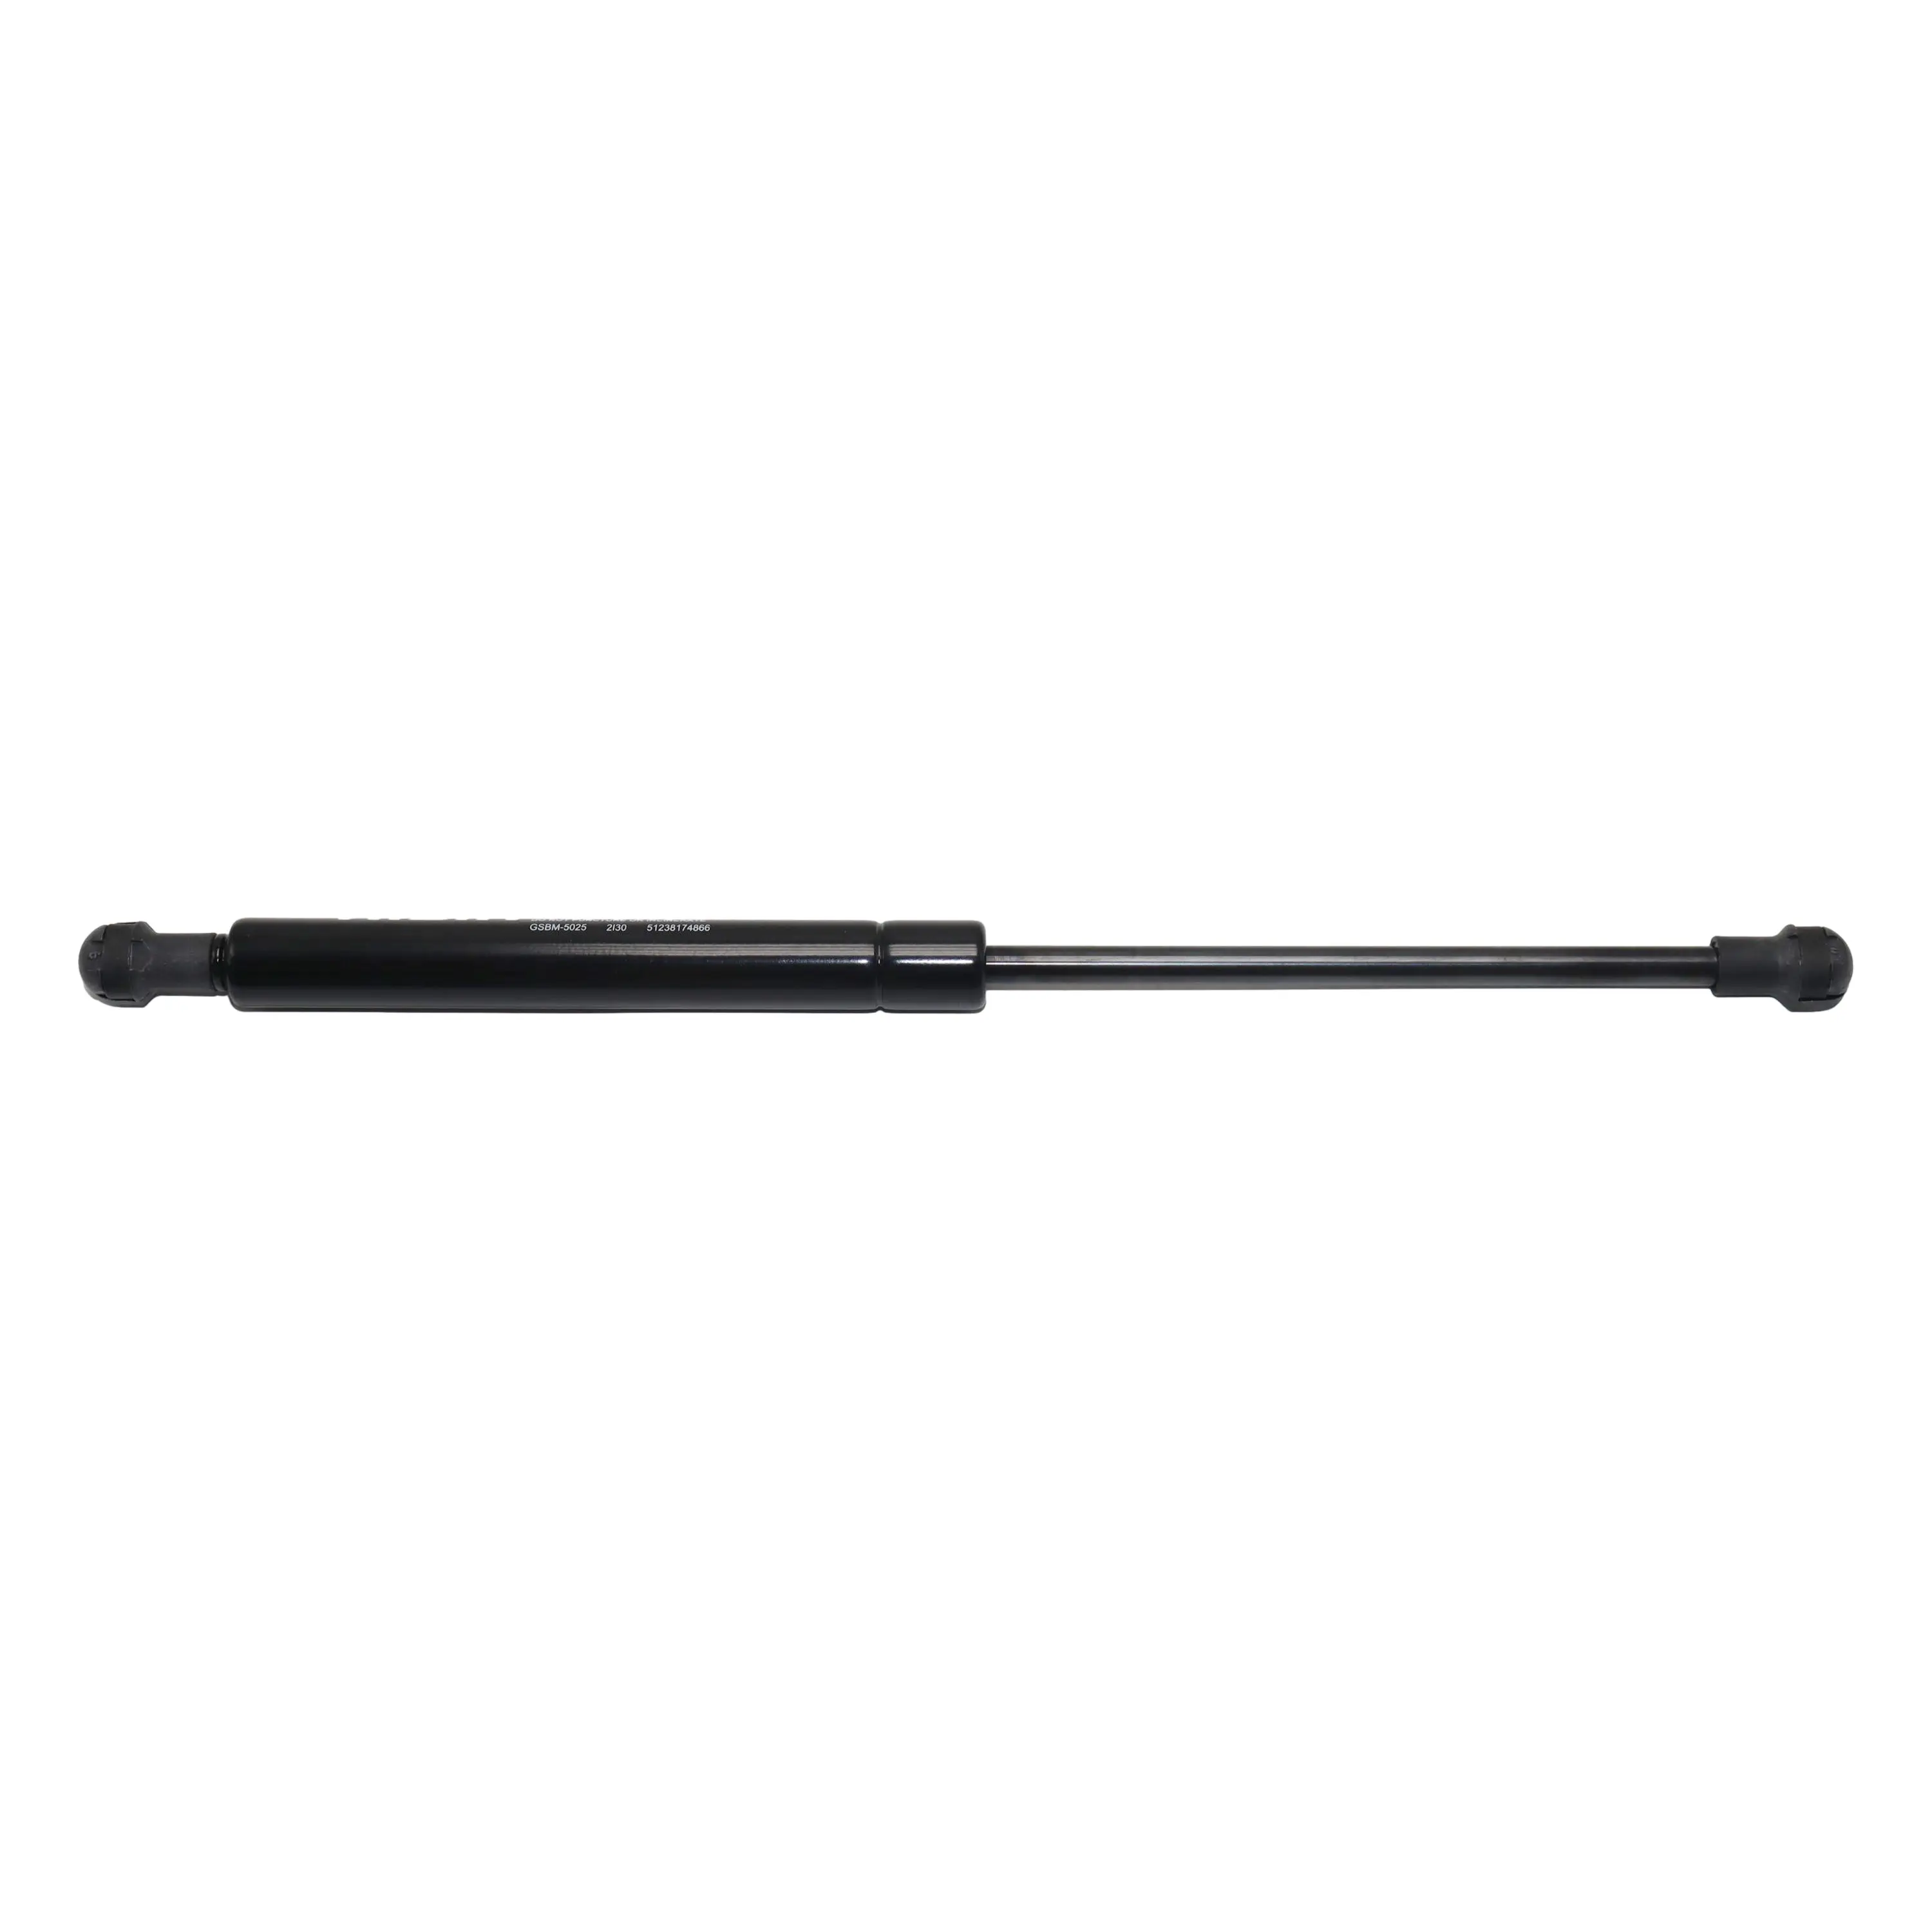 AISIN In Stock Auto Front Hood Gas Lift Support Shock Strut for for BMW M52 B20 E39 520I 51238174866 P/N GSBM-5025